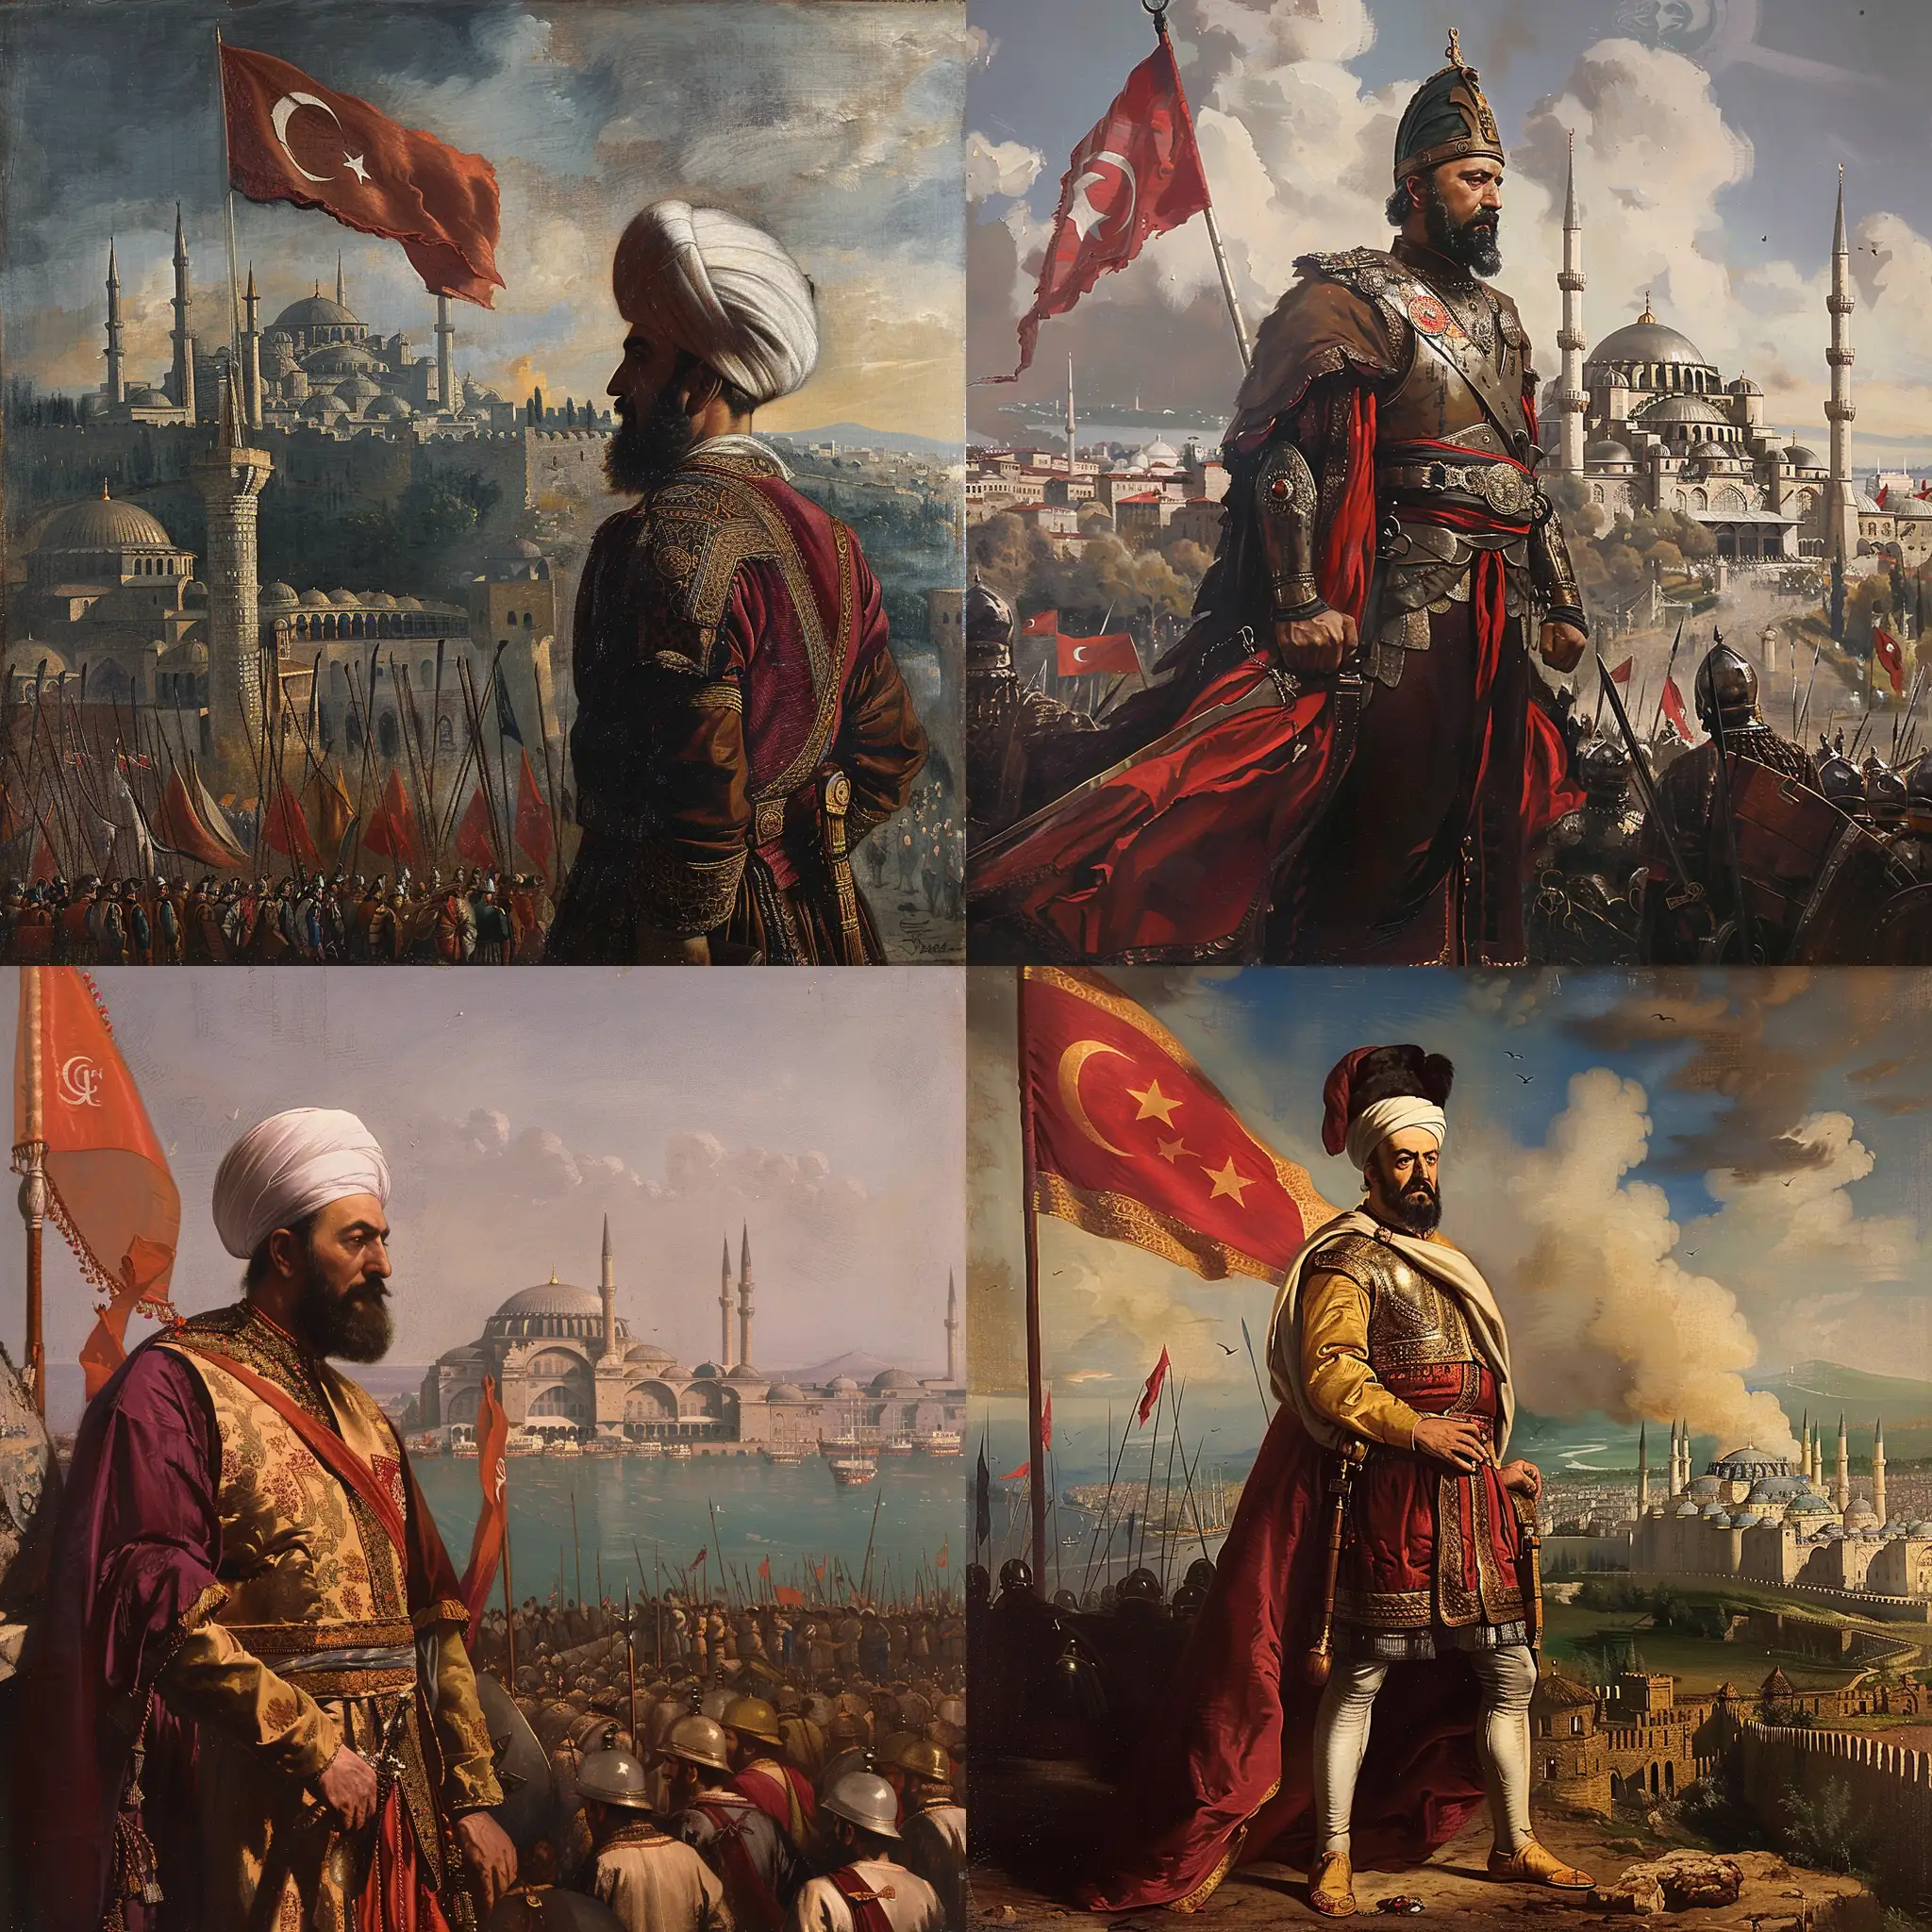 Sultan Suleiman The Magnificient standing in front of Constantinpole, artistic style